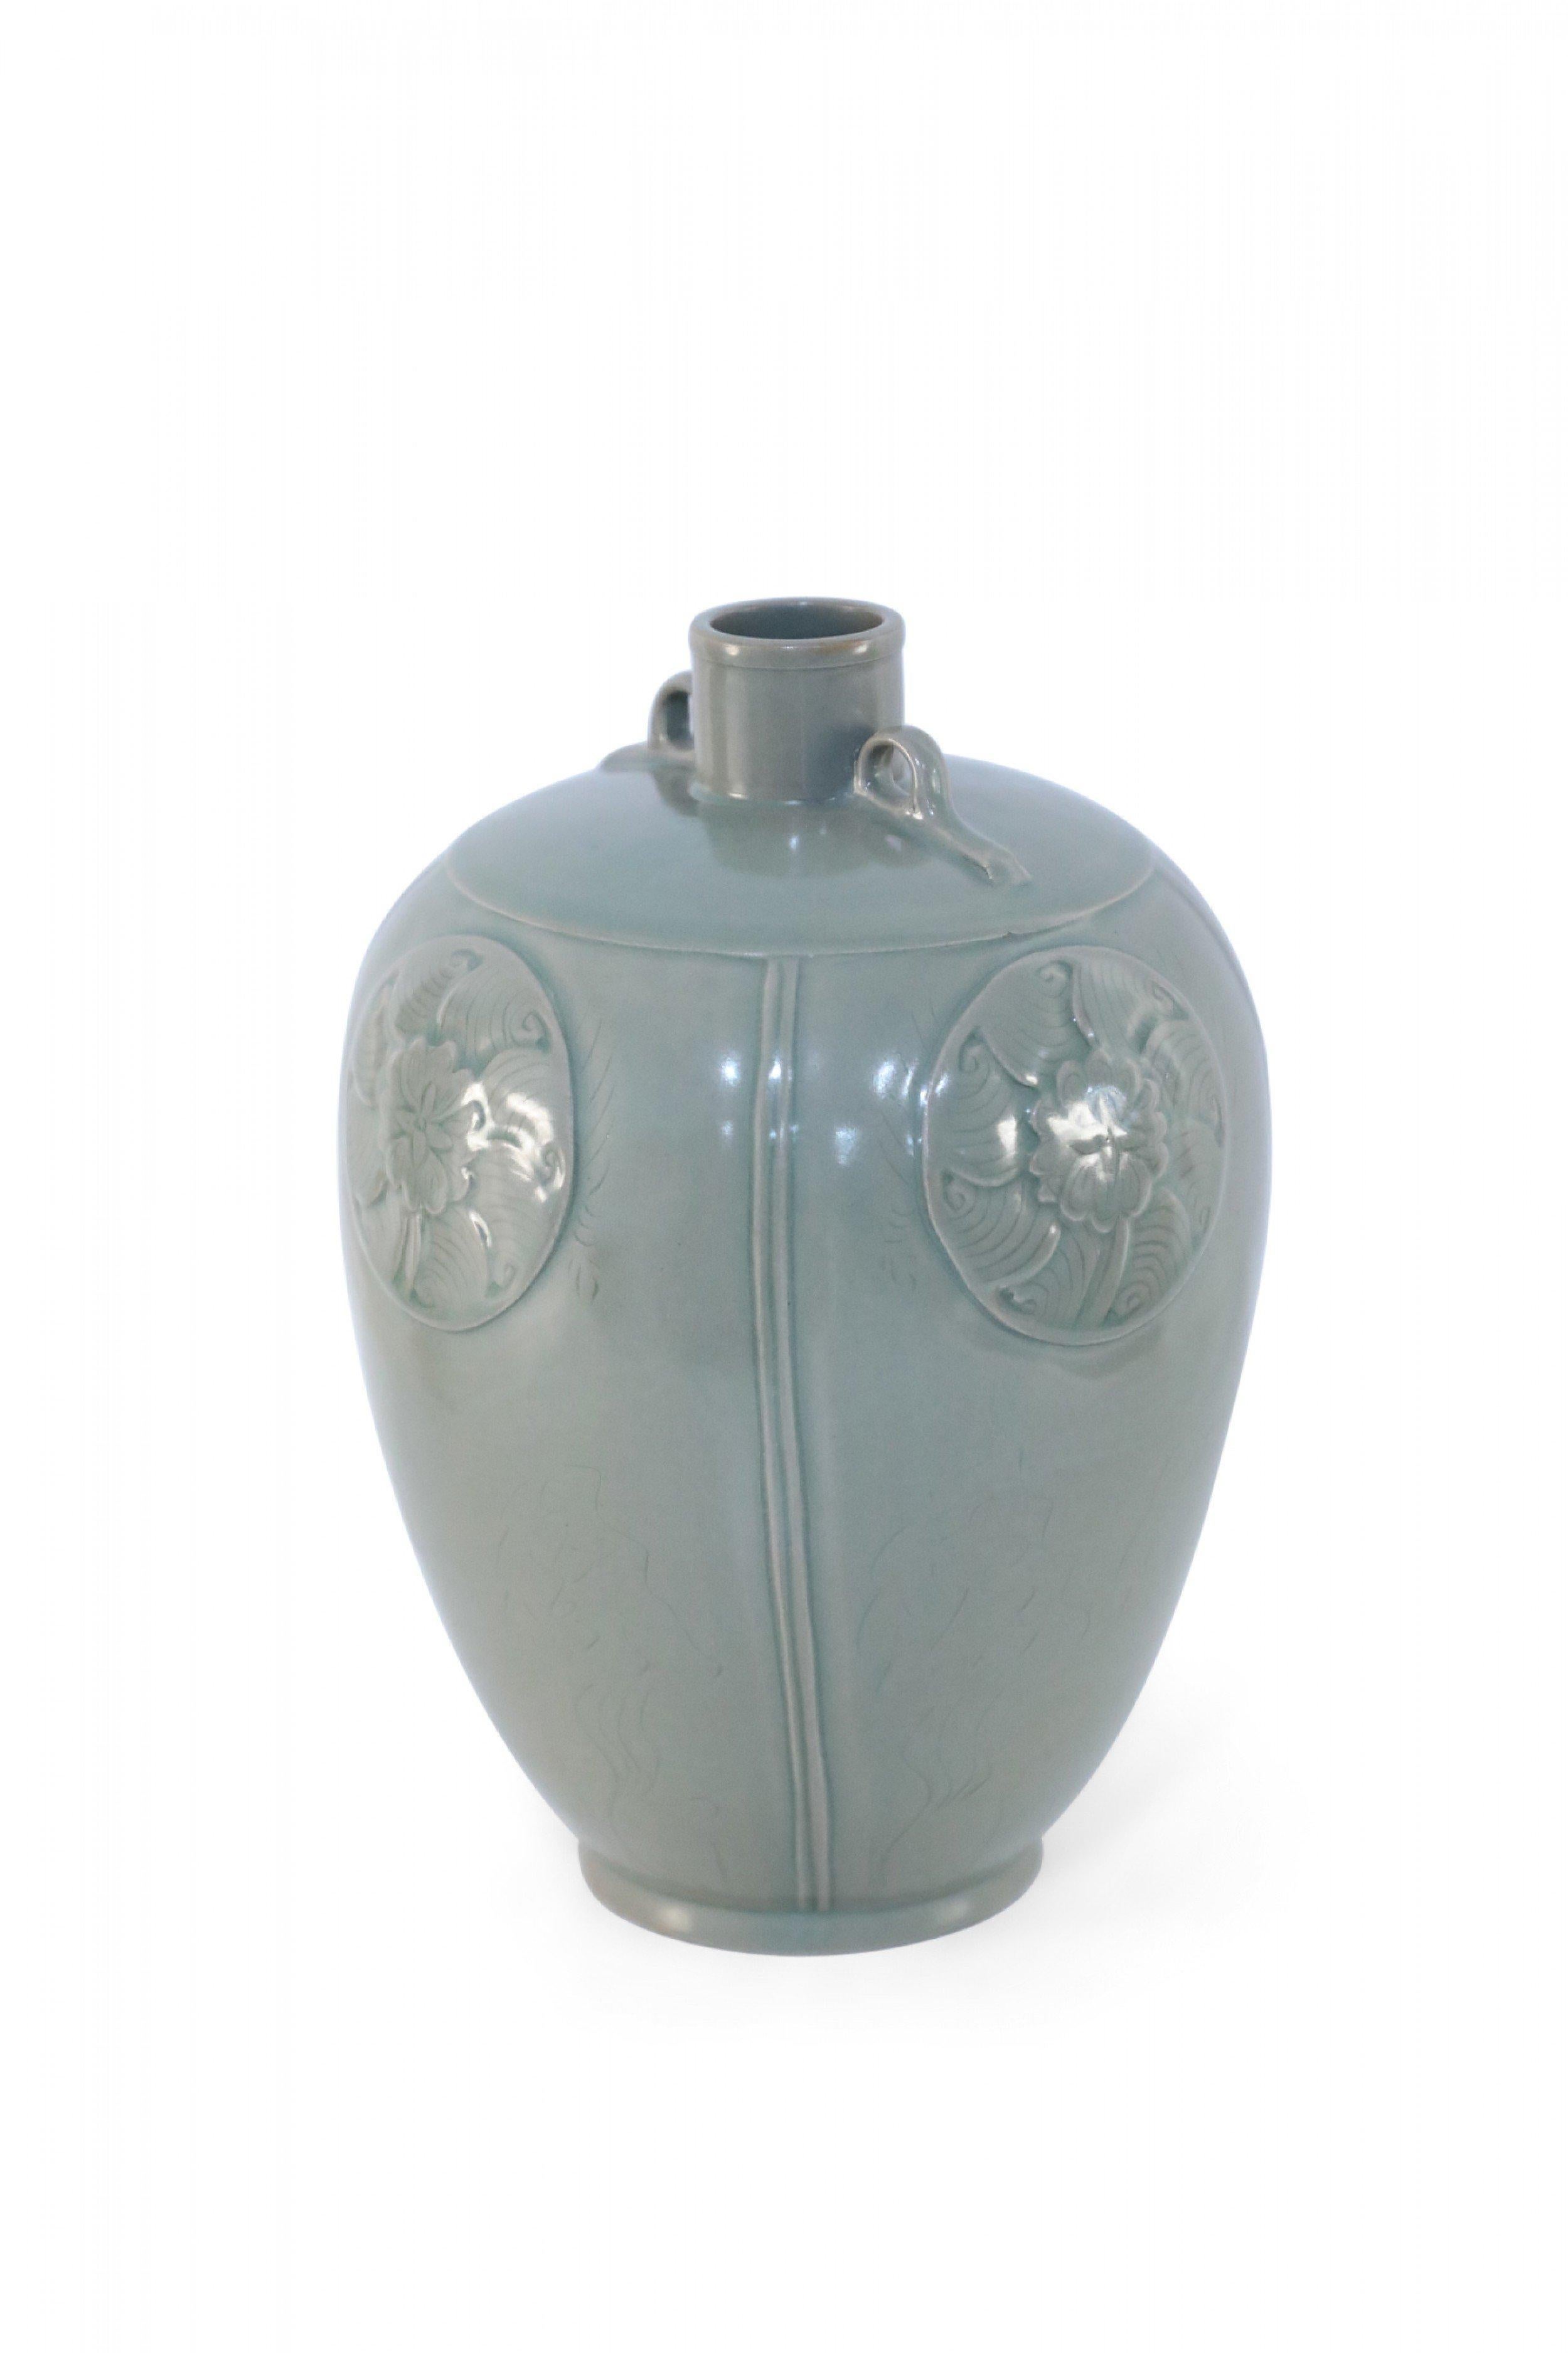 Antique Chinese (Late 19th century) gray porcelain vase in a Meiping form carved with tonal floral medallions and accented with diminutive handles at the opening.
    